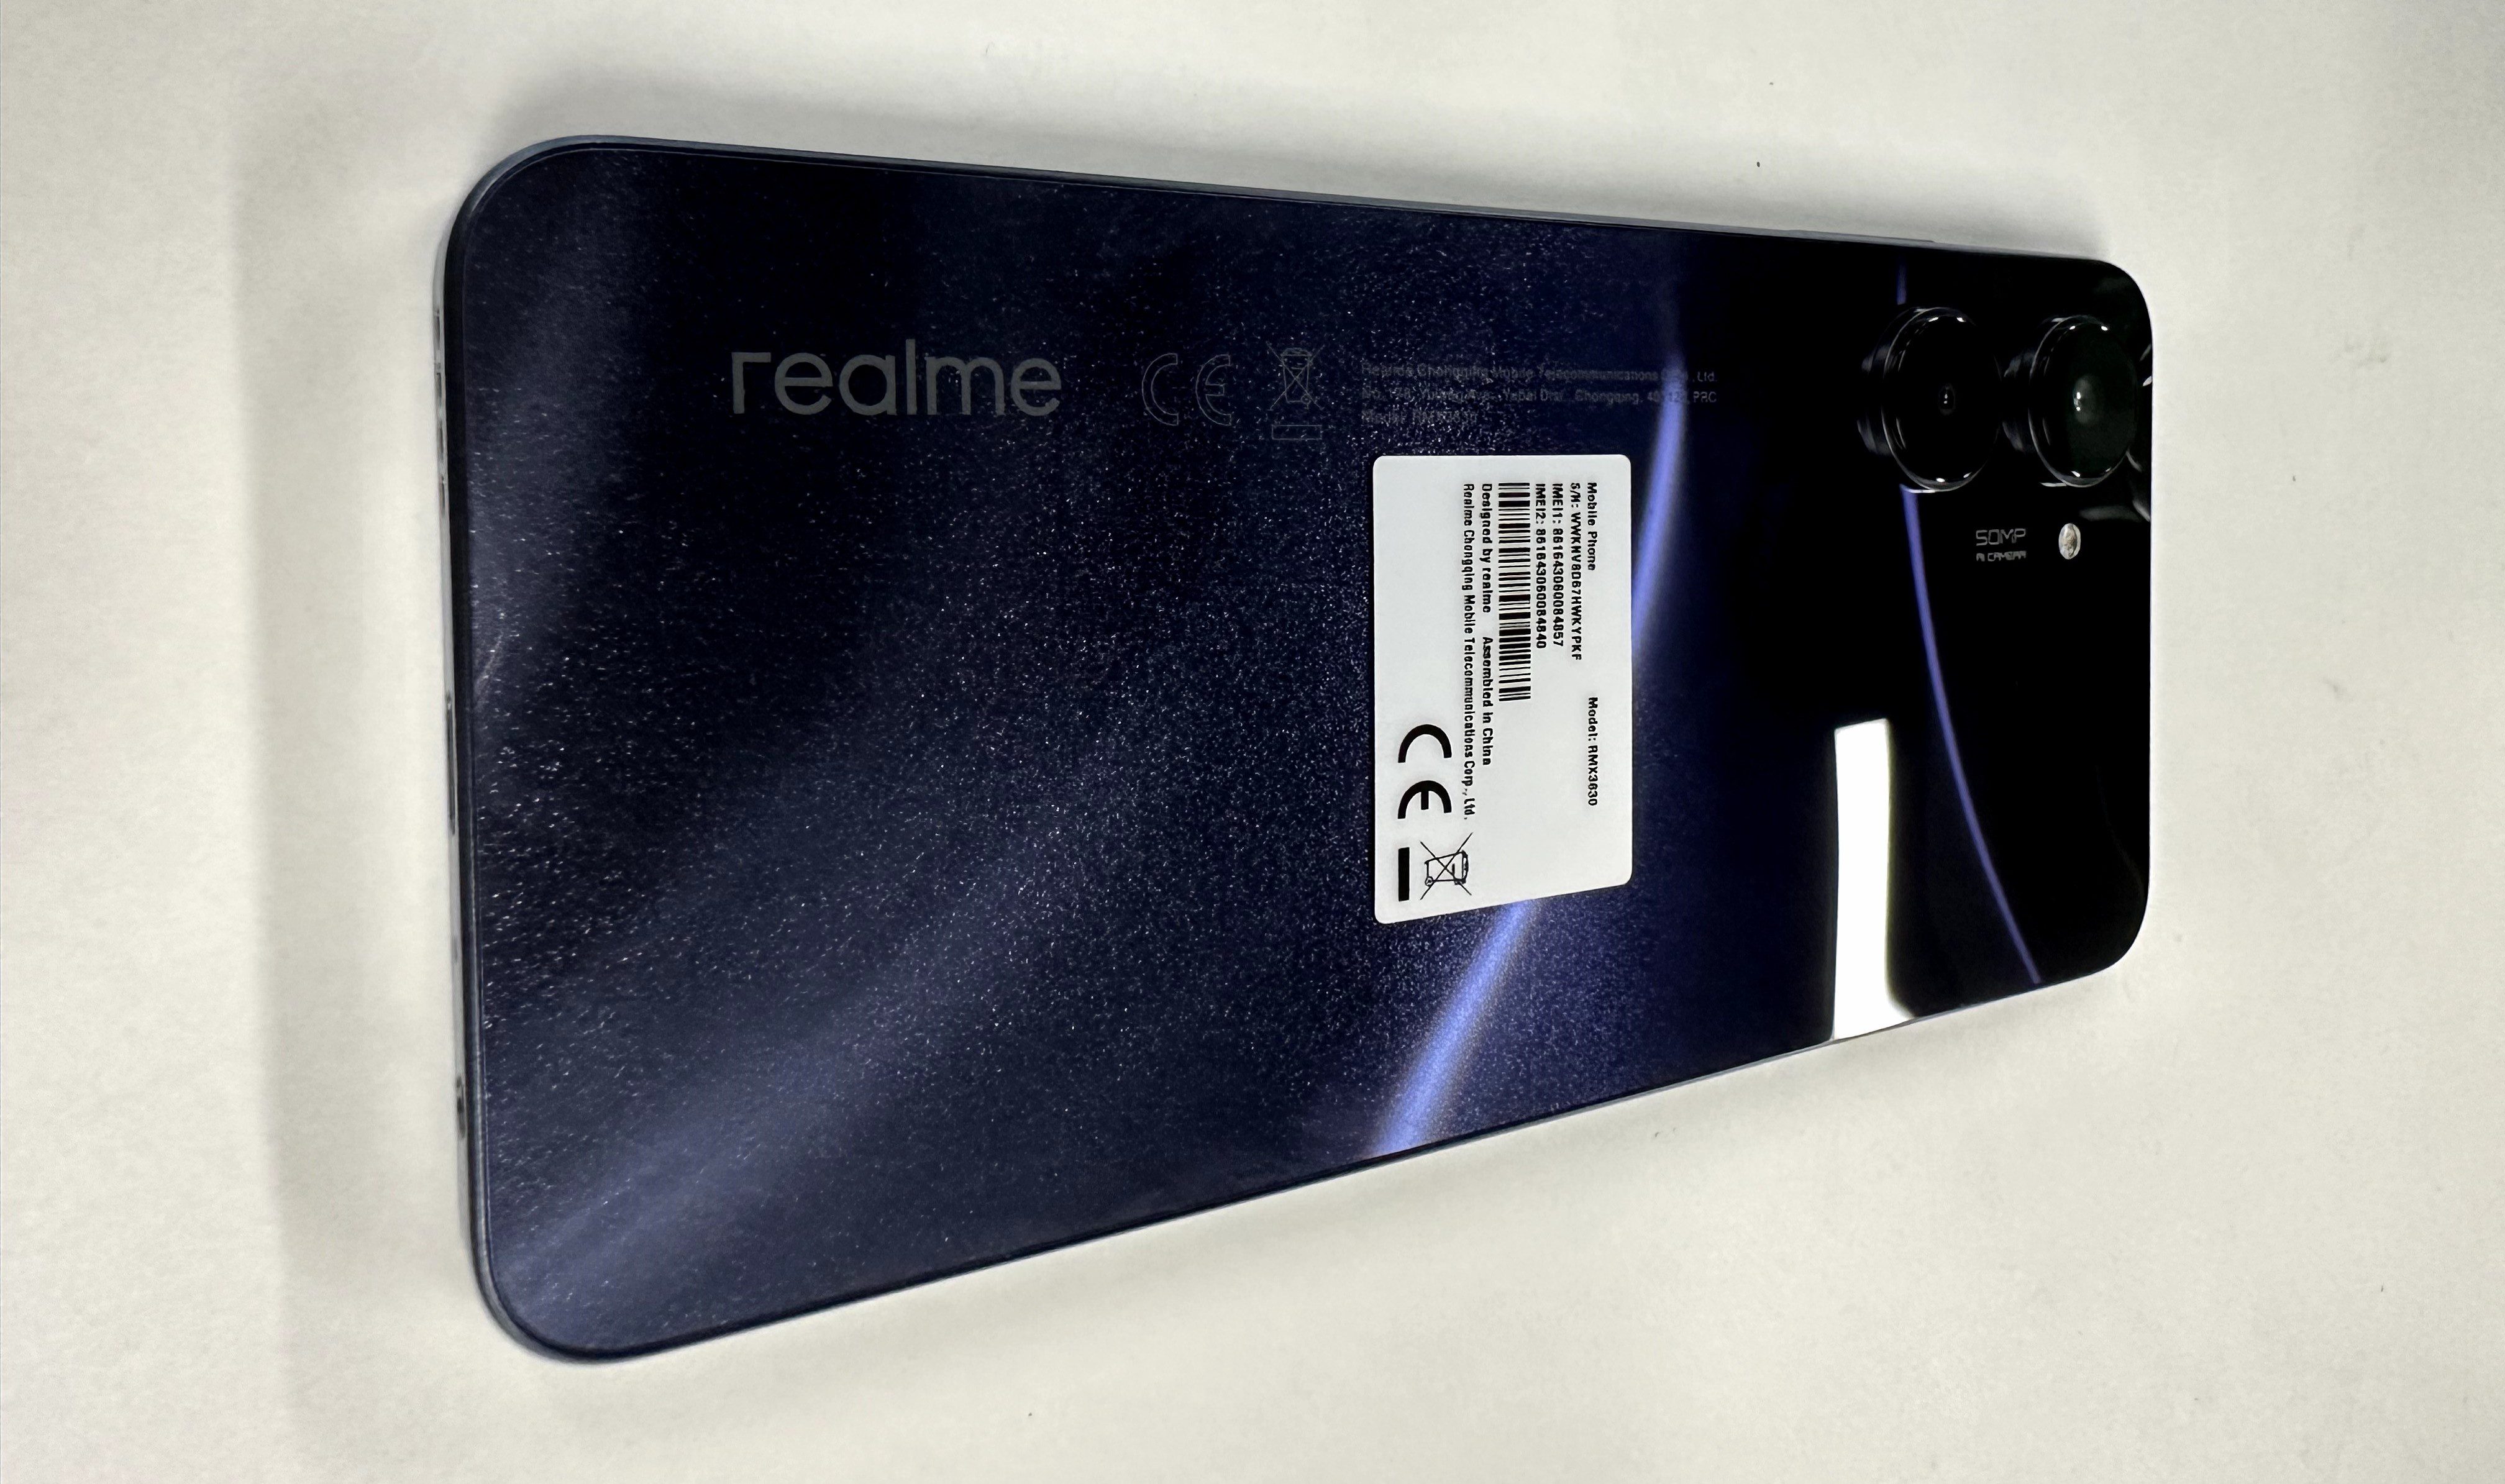 Realme 10 Smartphone - The best phone about $200 for social media lovers